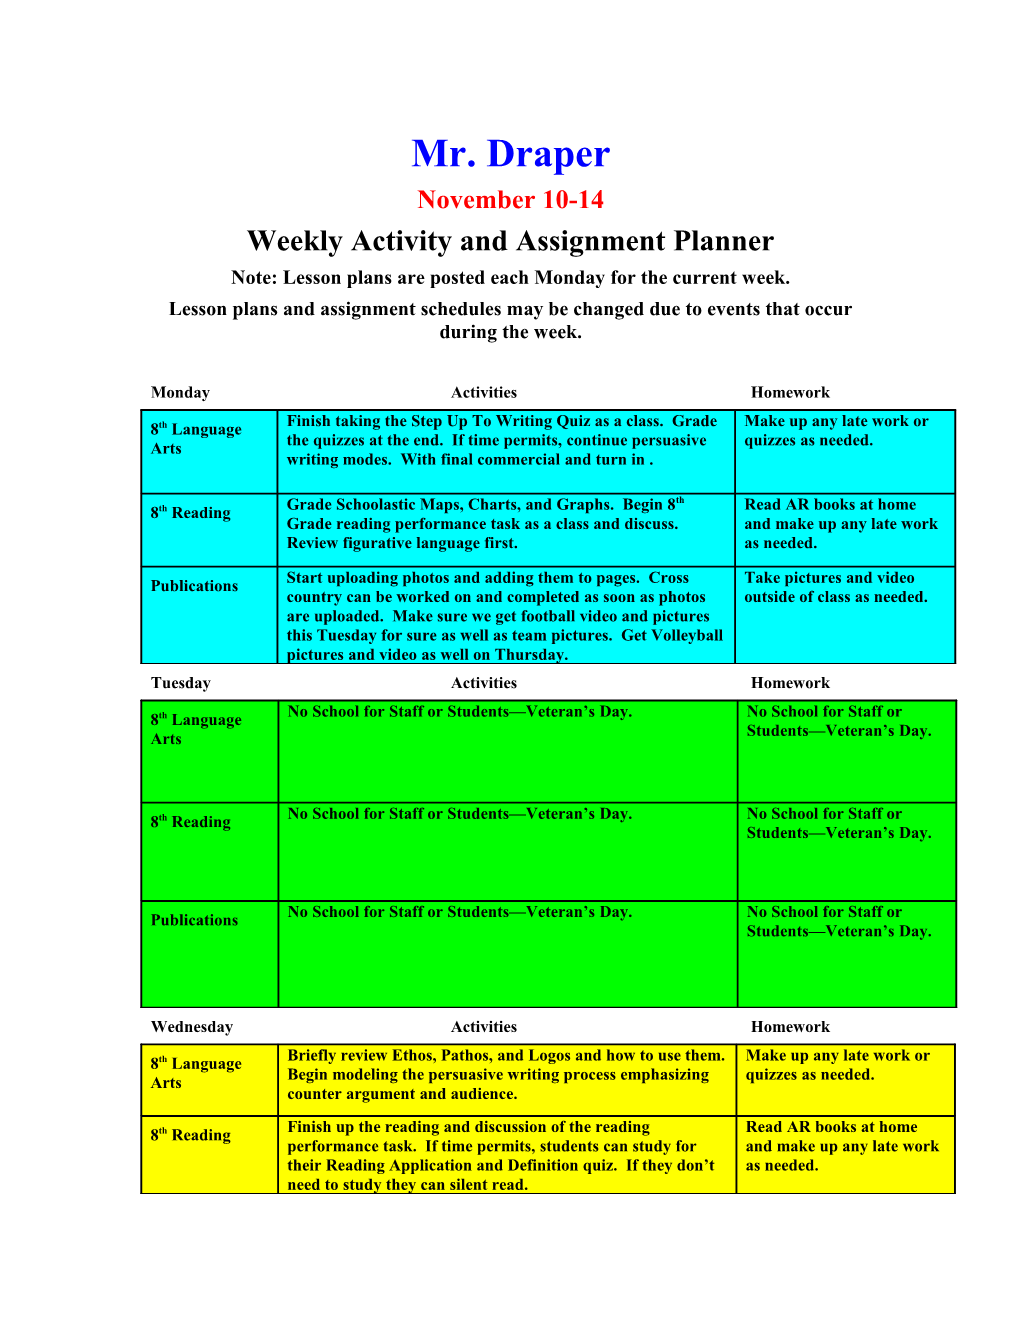 Weekly Activity and Assignment Planner